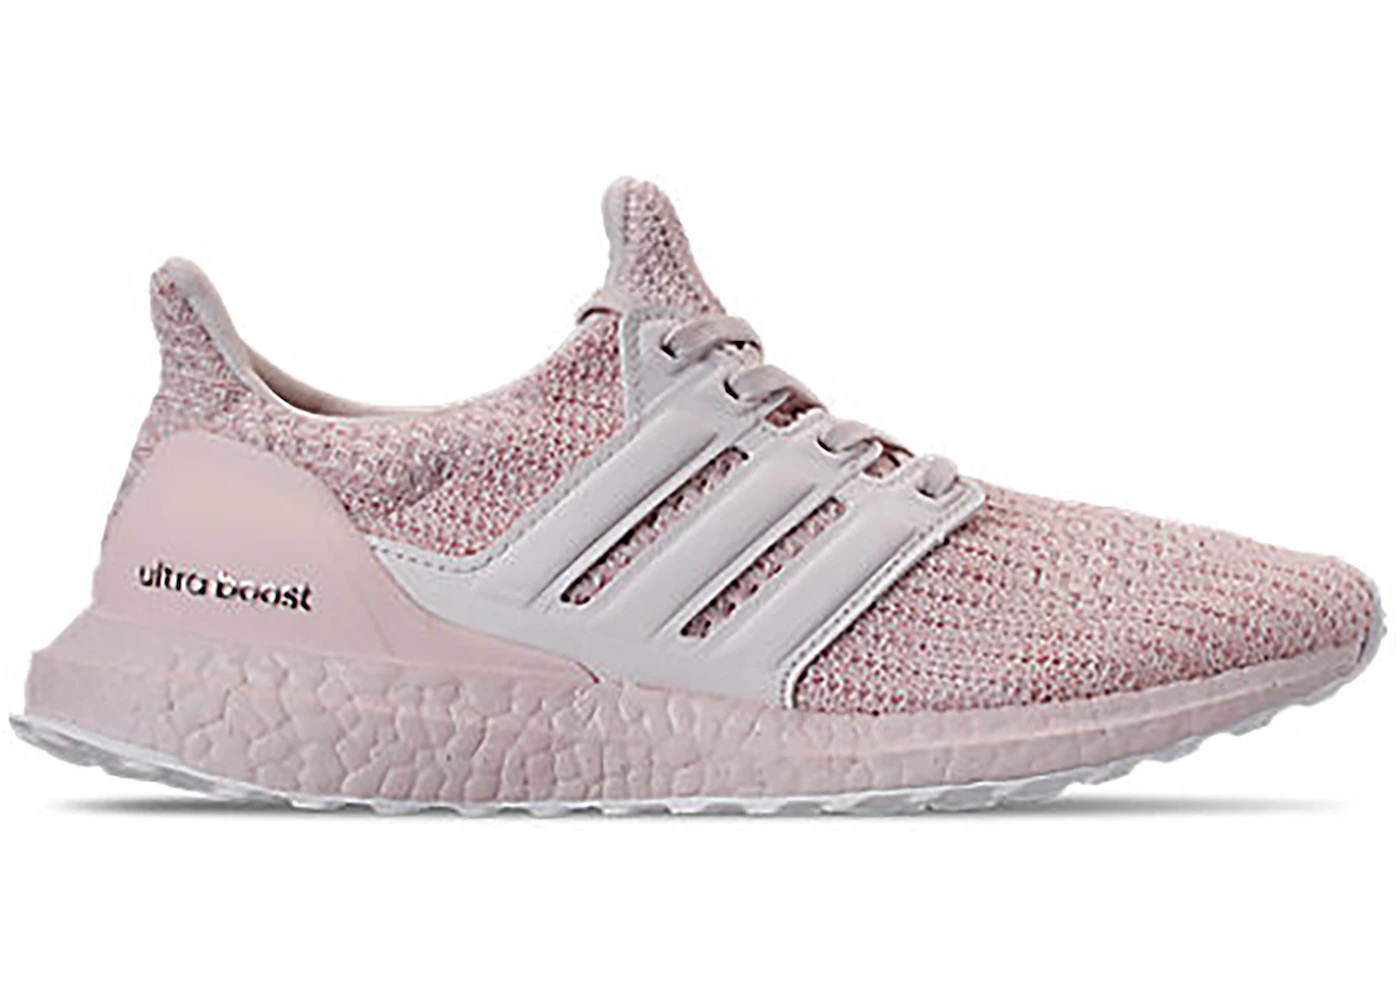 adidas Ultra Boost Orchid Tint (Women's) - G54006 - US